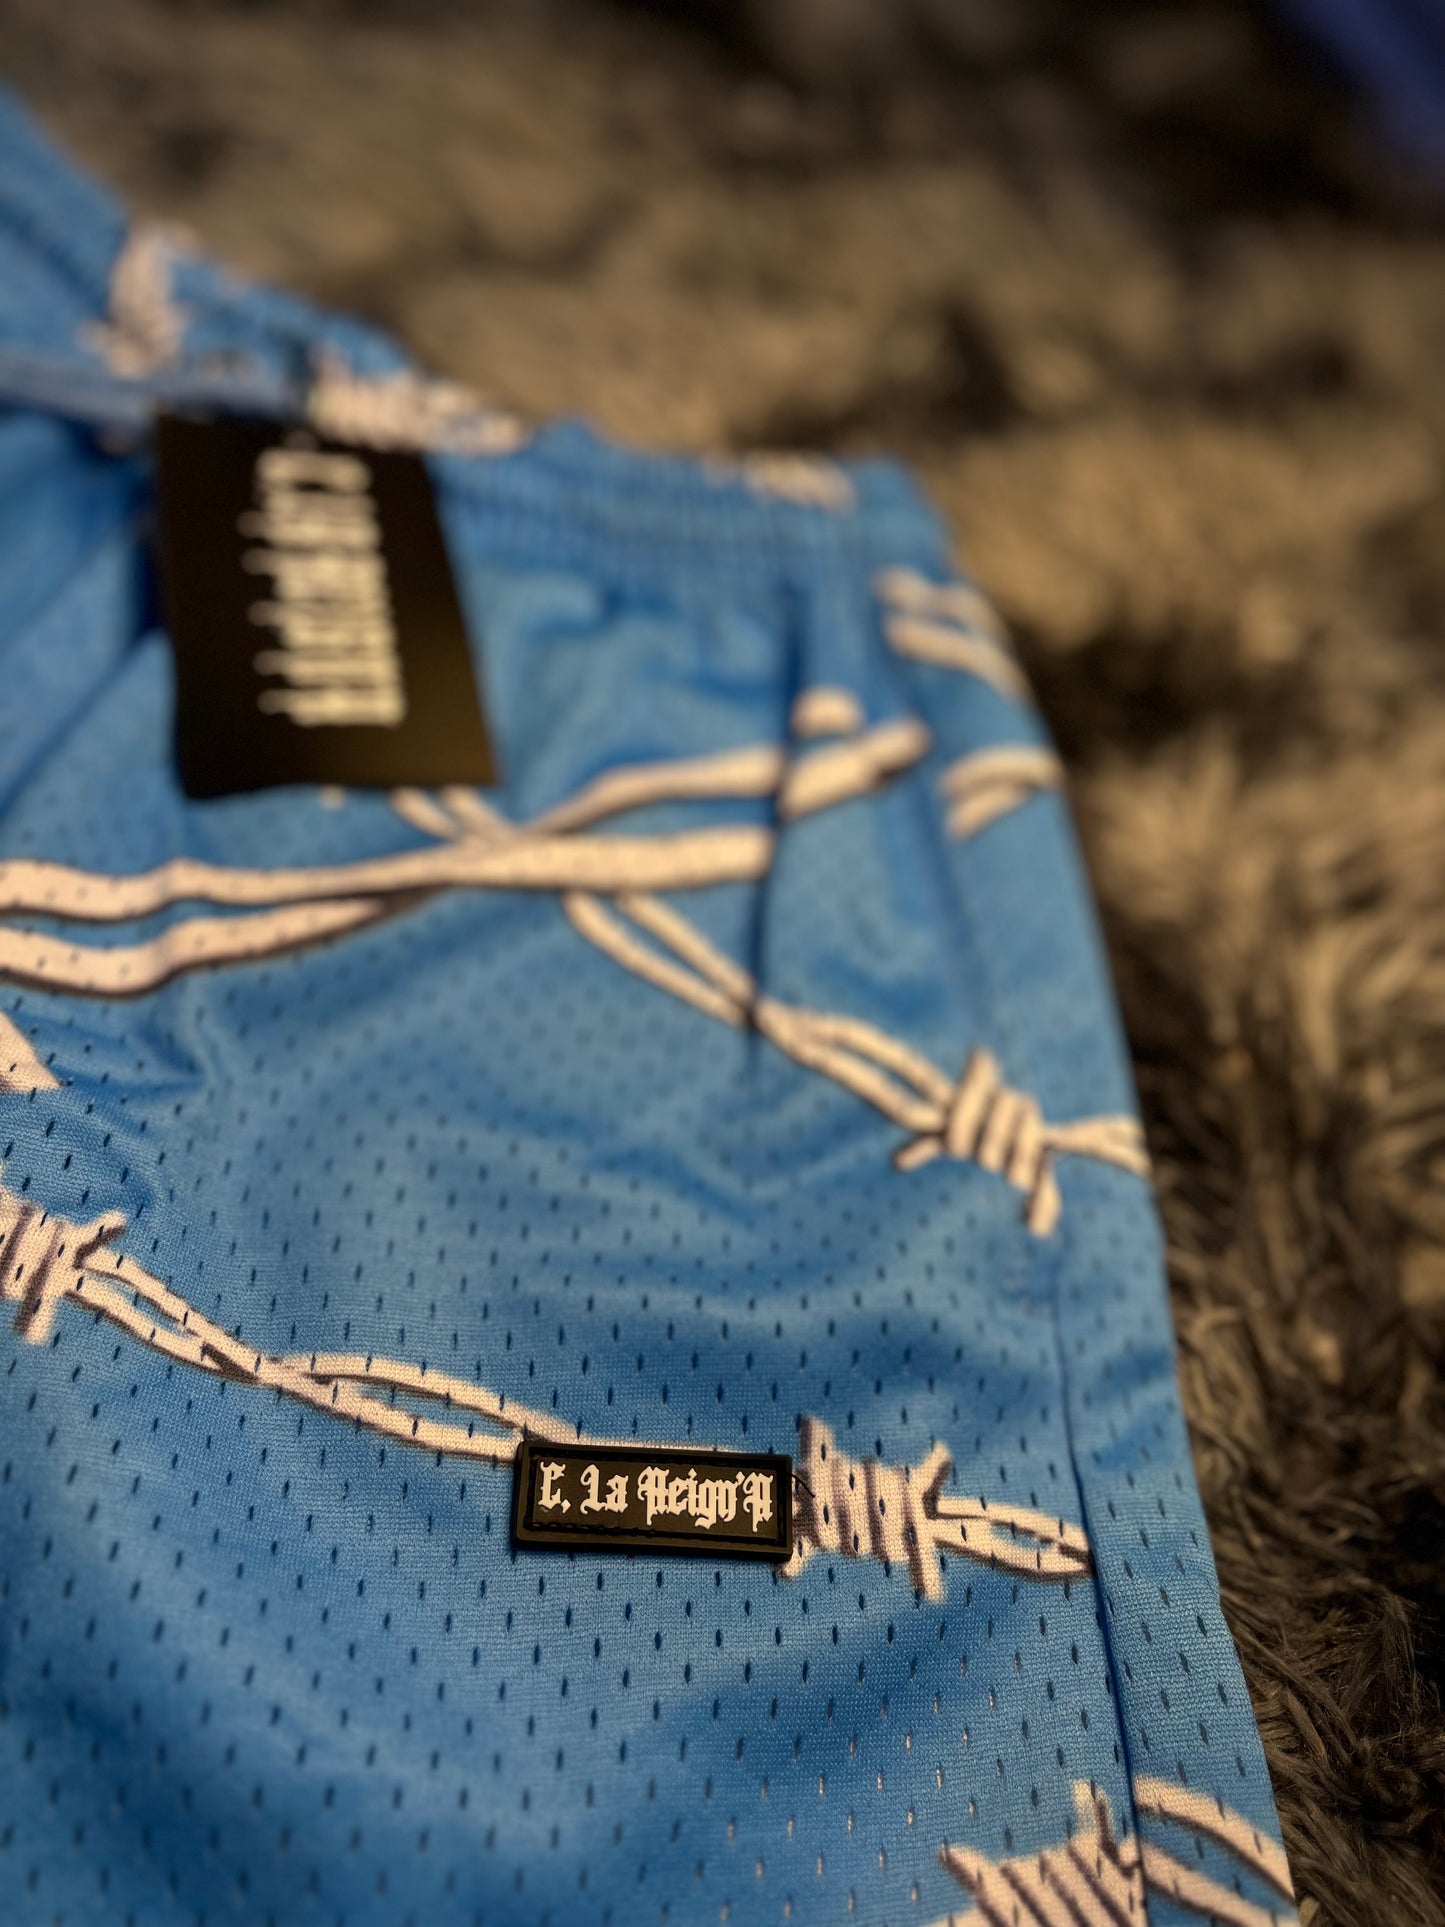 BARBED WIRE MESH SHORTS - BABY BLUE